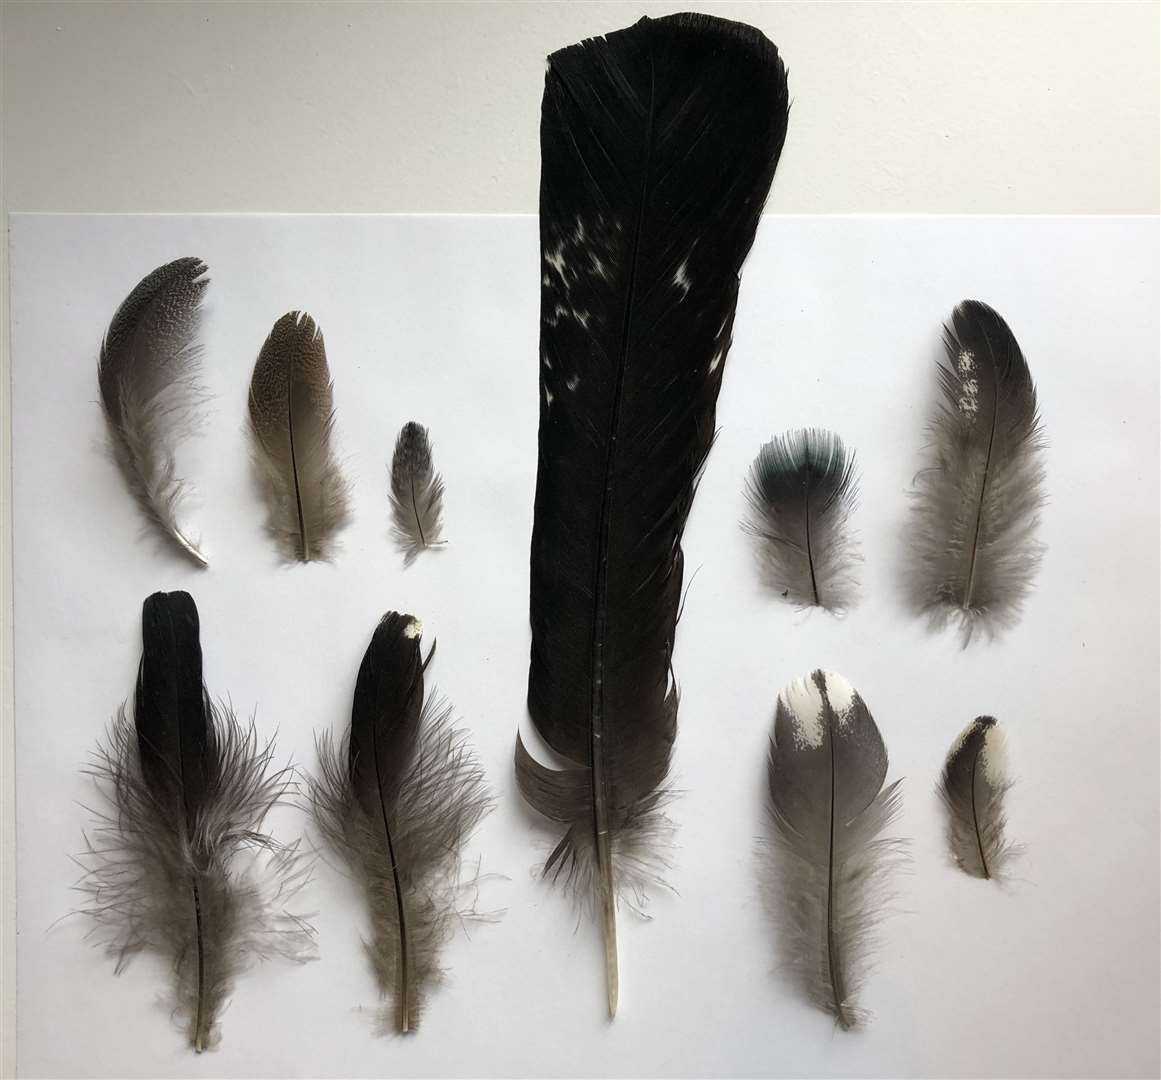 Black grouse feathers were collected by the local community.  Photo: The Capercaillie project in Cairngorms.